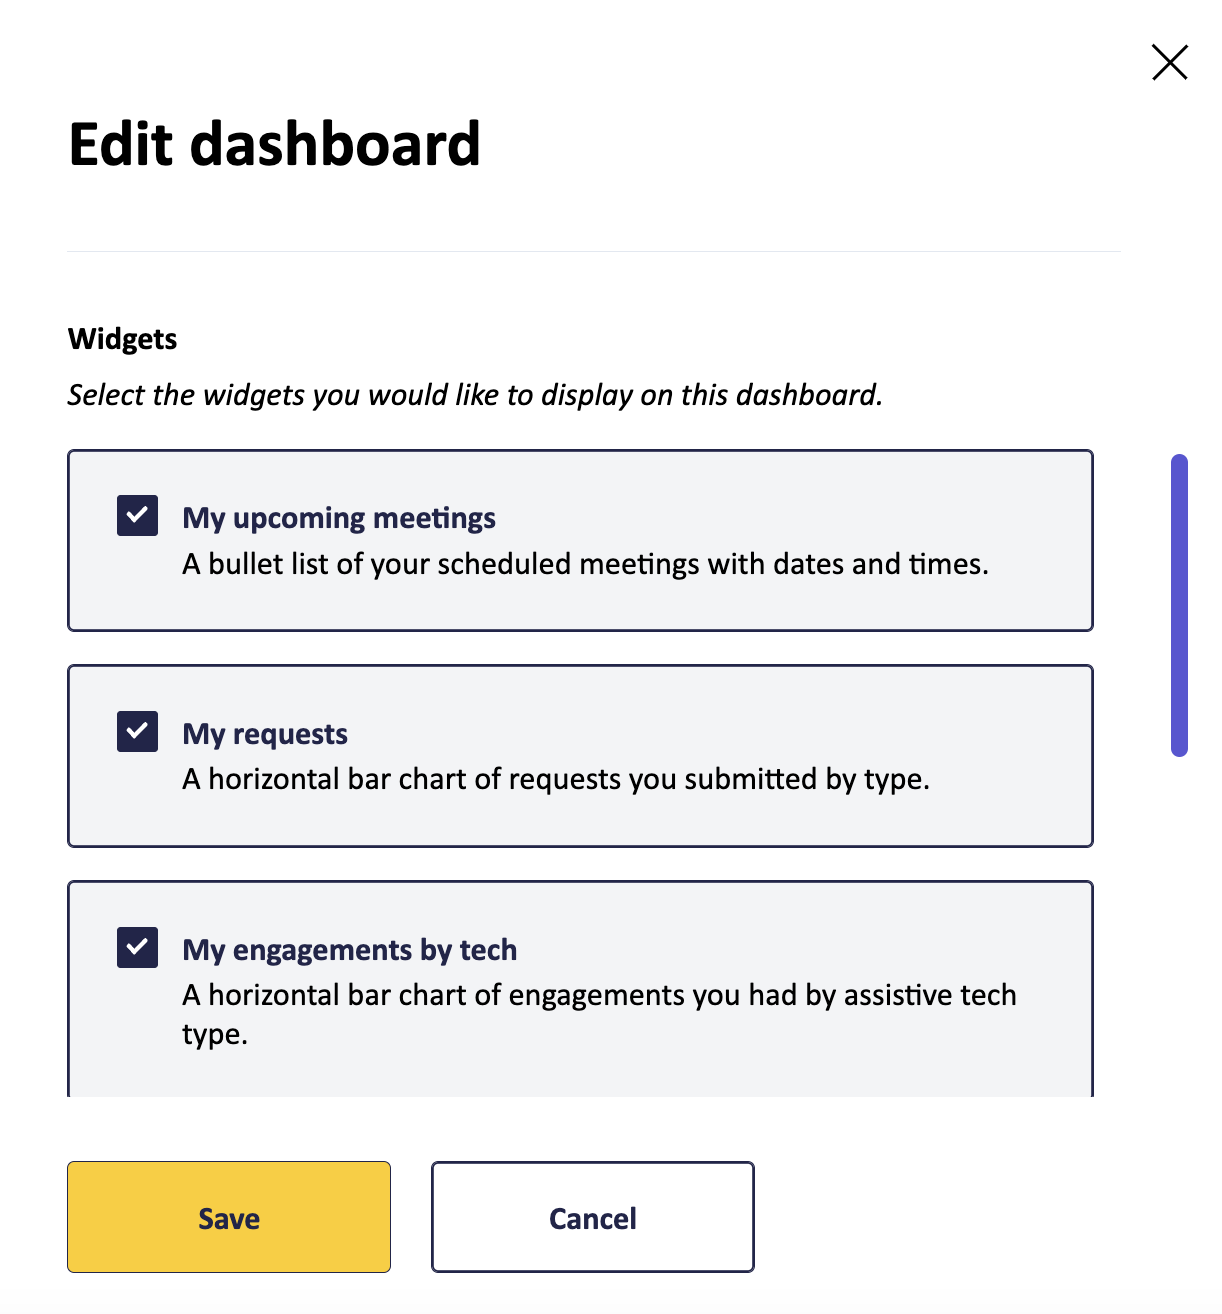 Screenshot of the edit dashboard modal with a list of widgets with names and descriptions, each with a selectable checkbox.